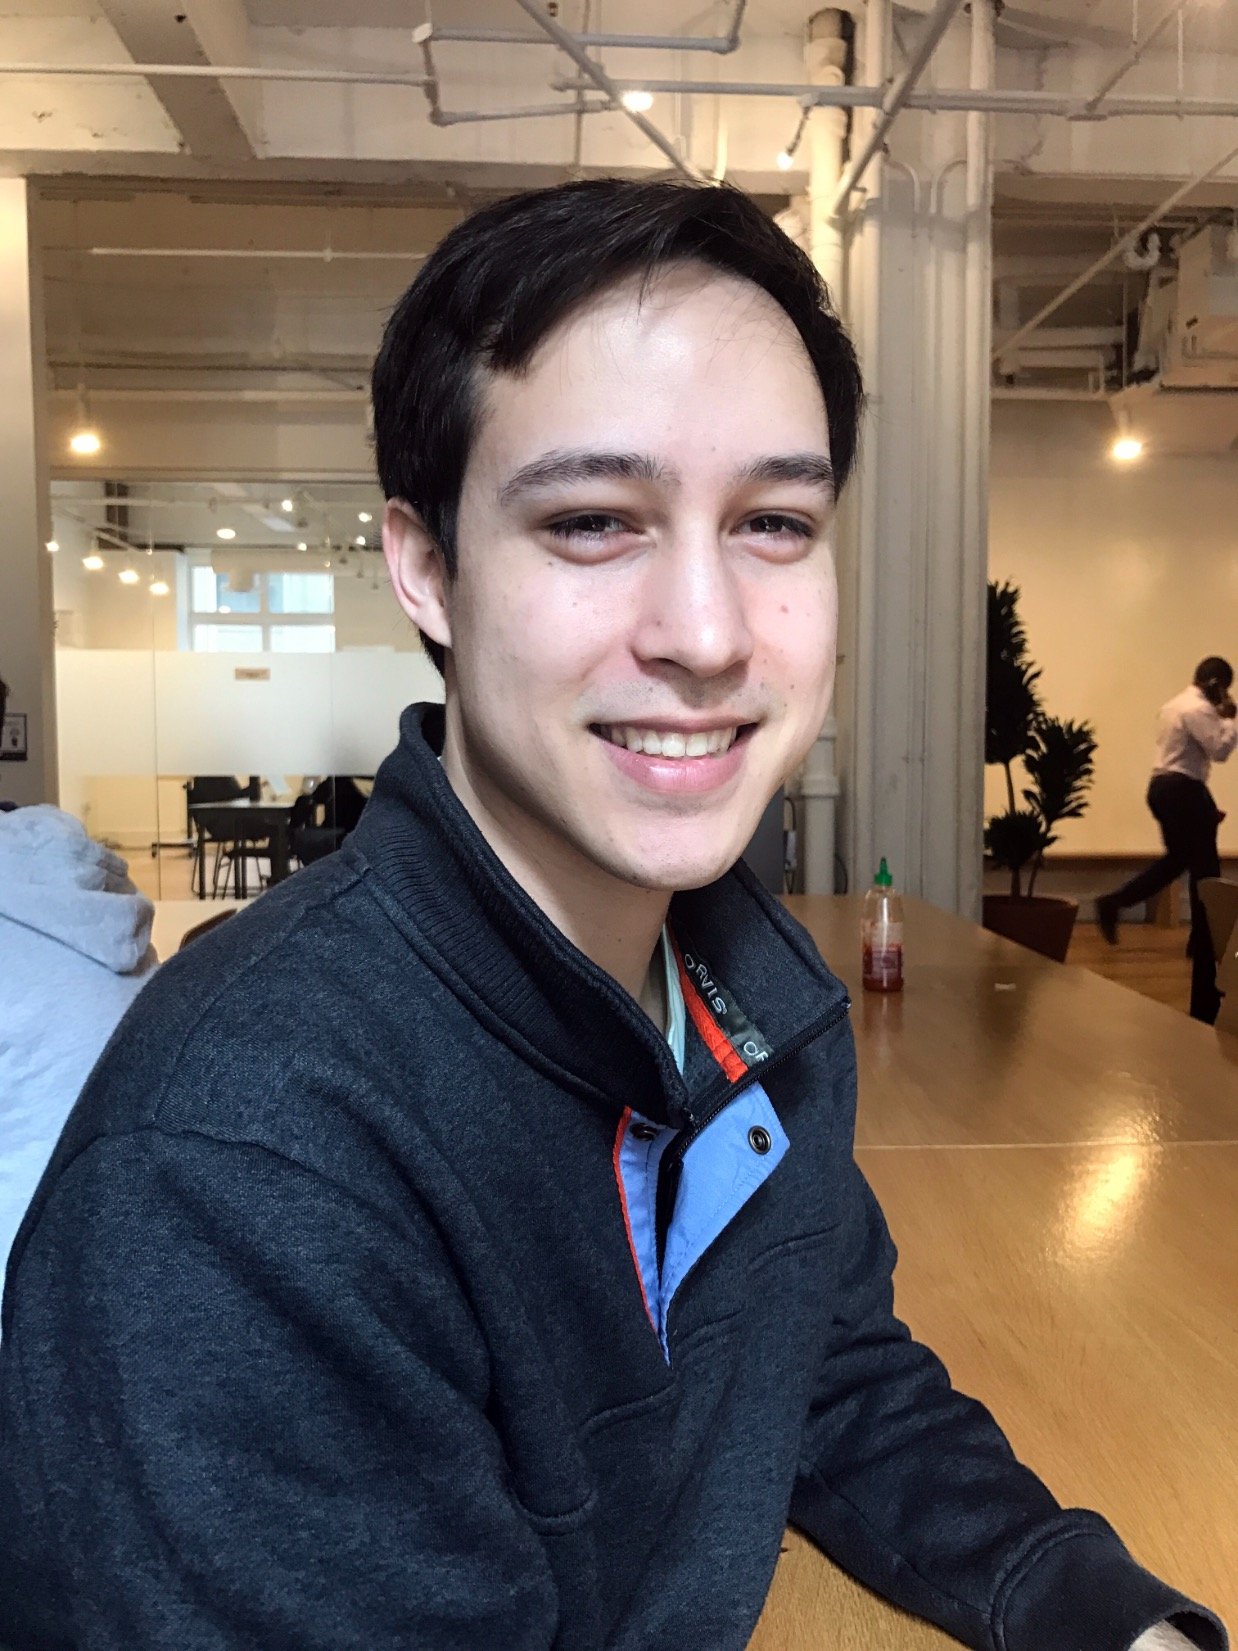 UX researcher coming from design and animation. Hapa man, soccer fan, pizza, dogs, and Jackie Chan